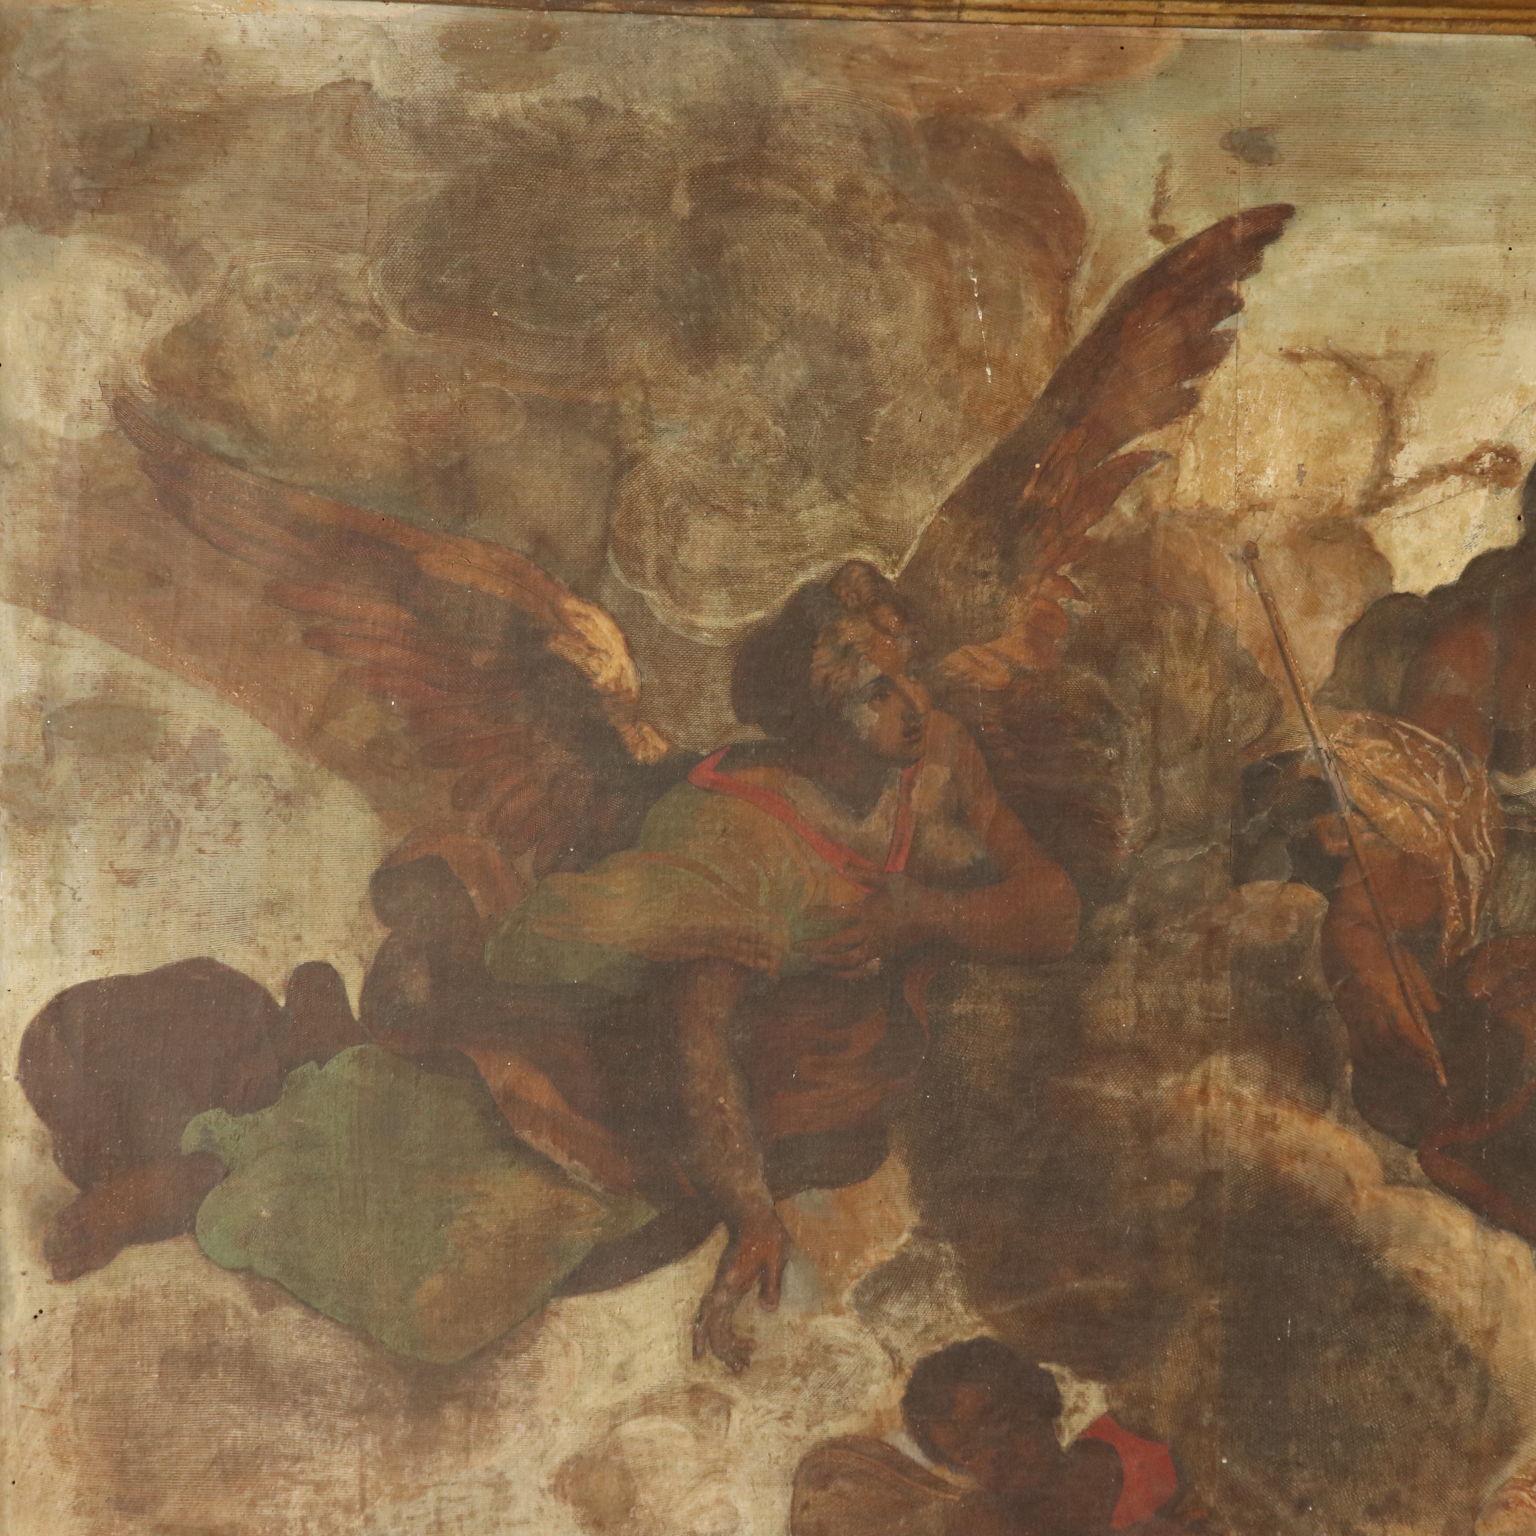 Painting belonging to the Italian Arte Povera movement, oil on canvas with engraving technique. The engravings prepared ad hoc to decorate furniture and objects developed especially in the Veneto region, between 1600 and 1700. They were rarely used